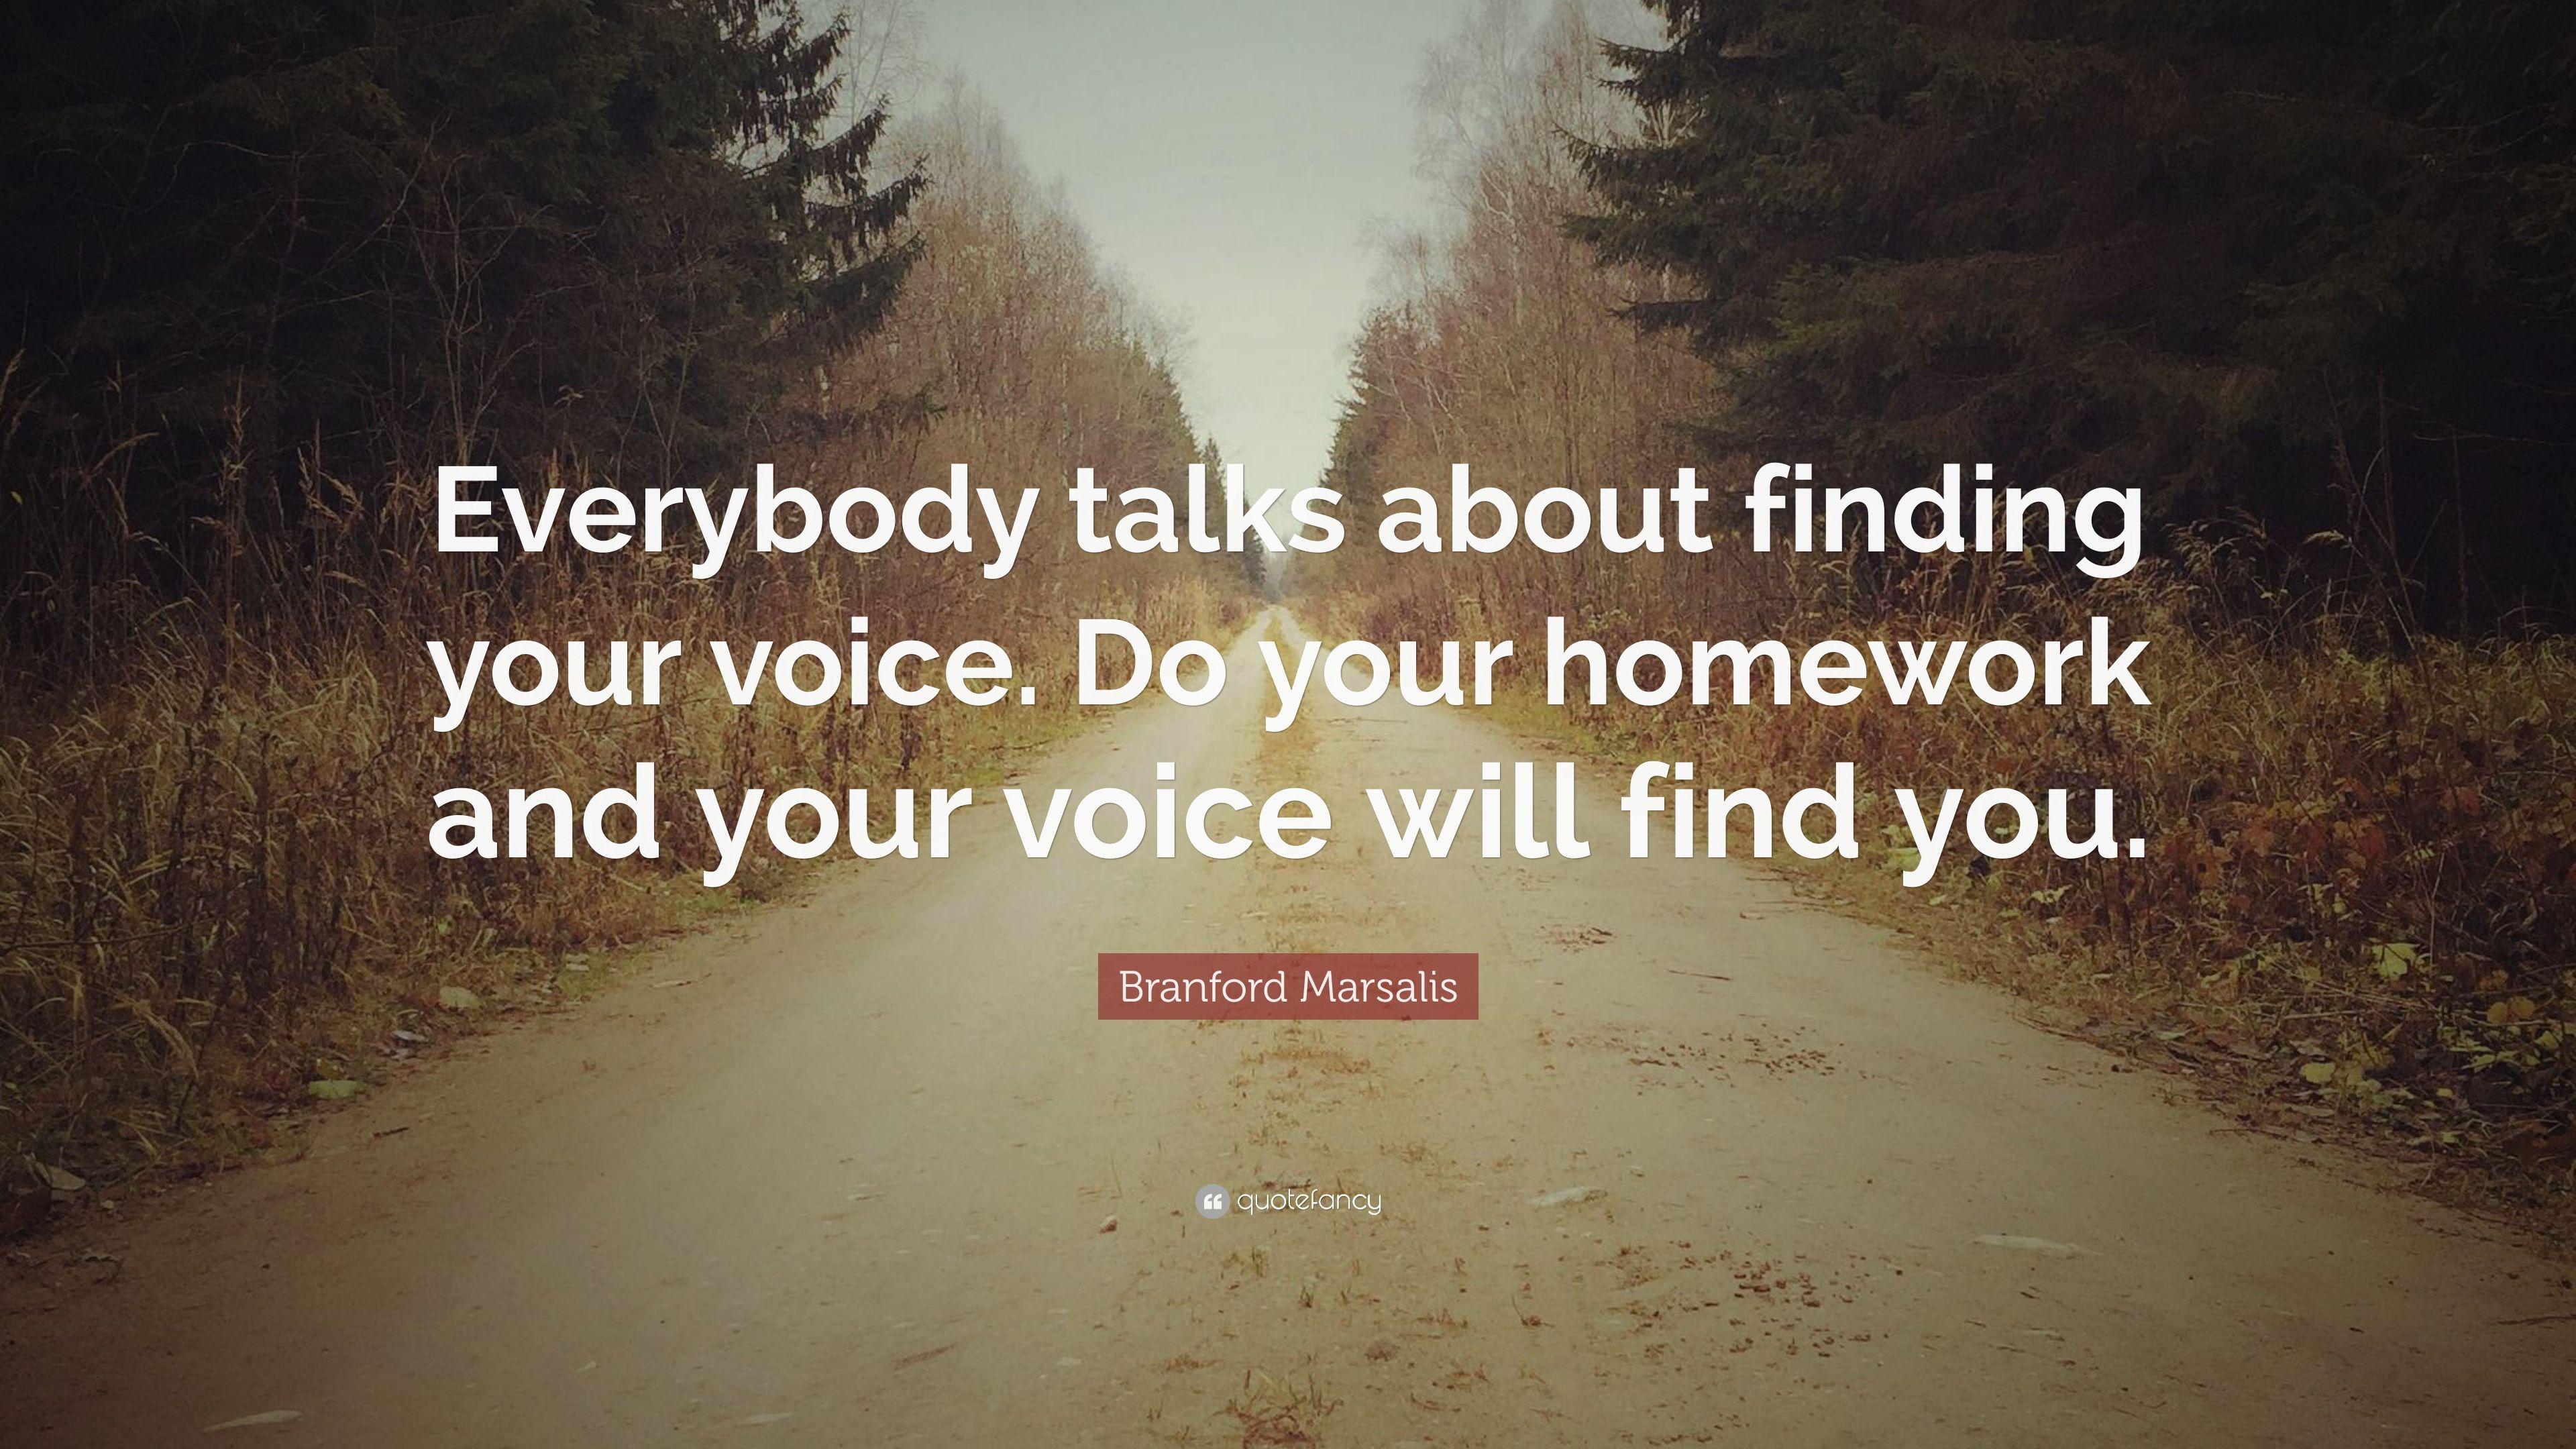 Branford Marsalis Quote: “Everybody talks about finding your voice